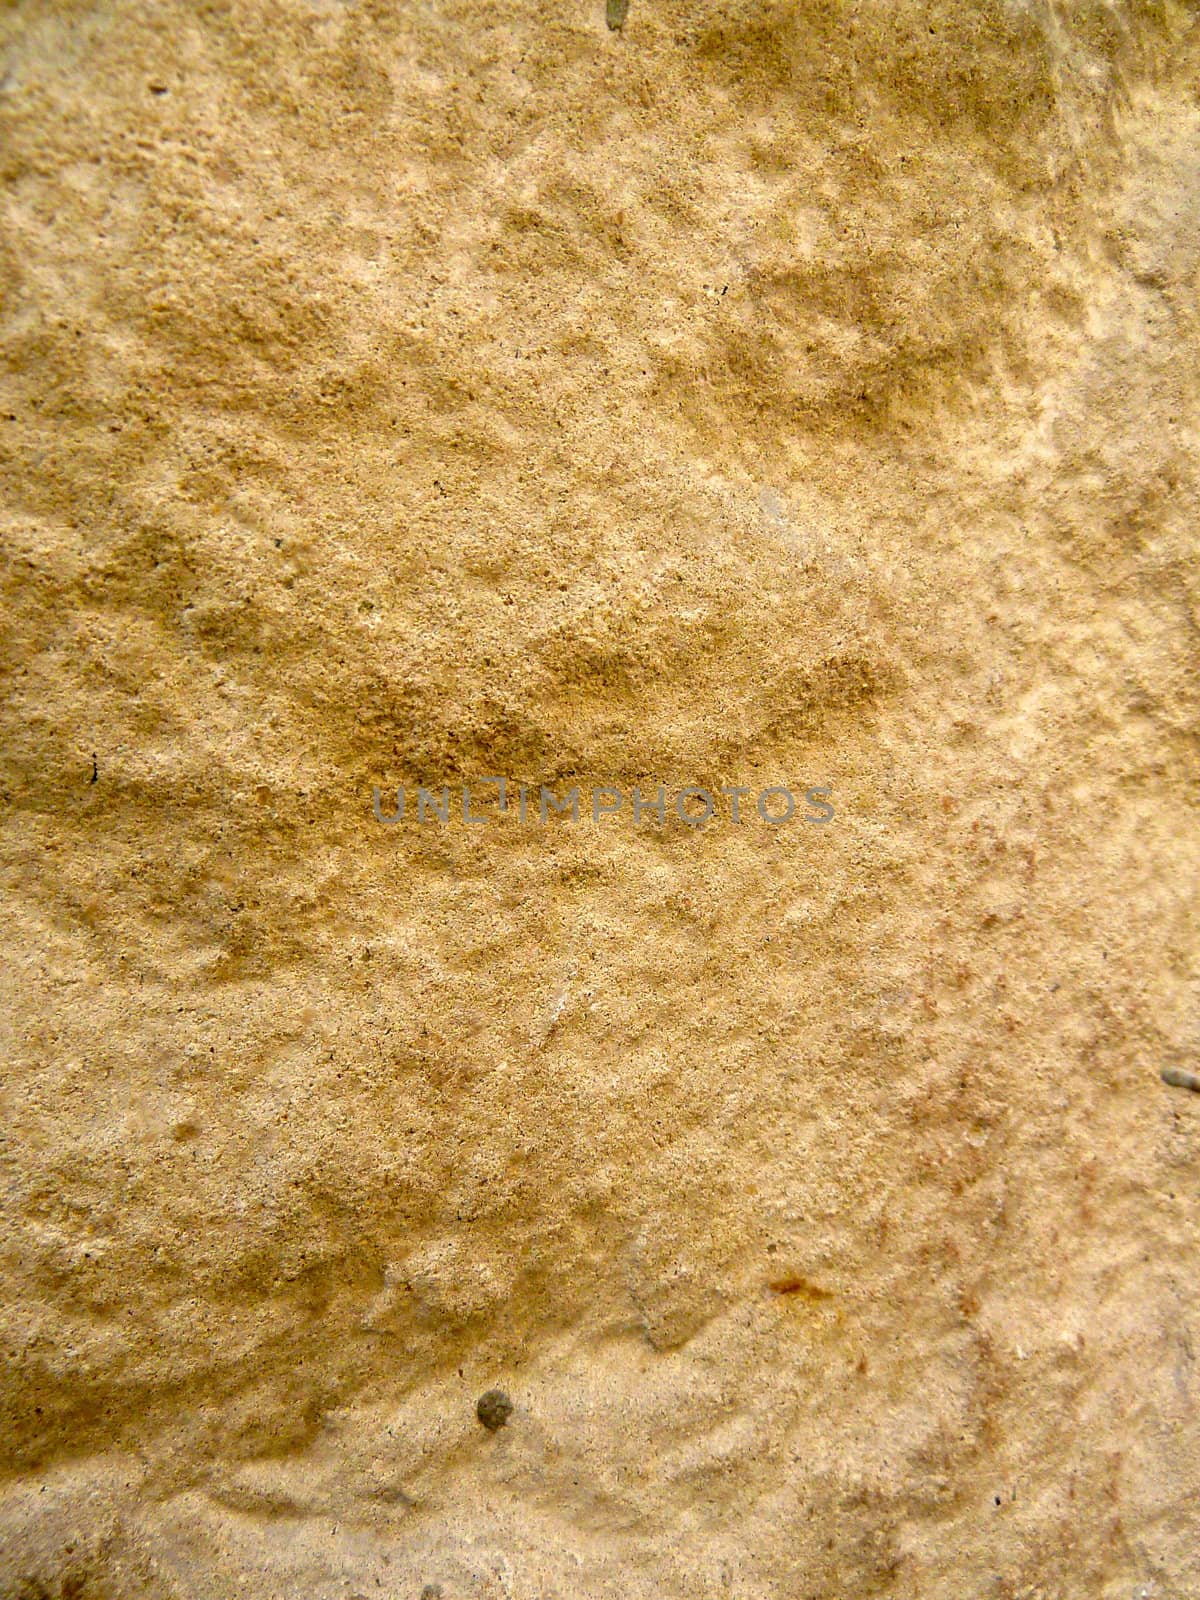 yellow sandstone surface as a background